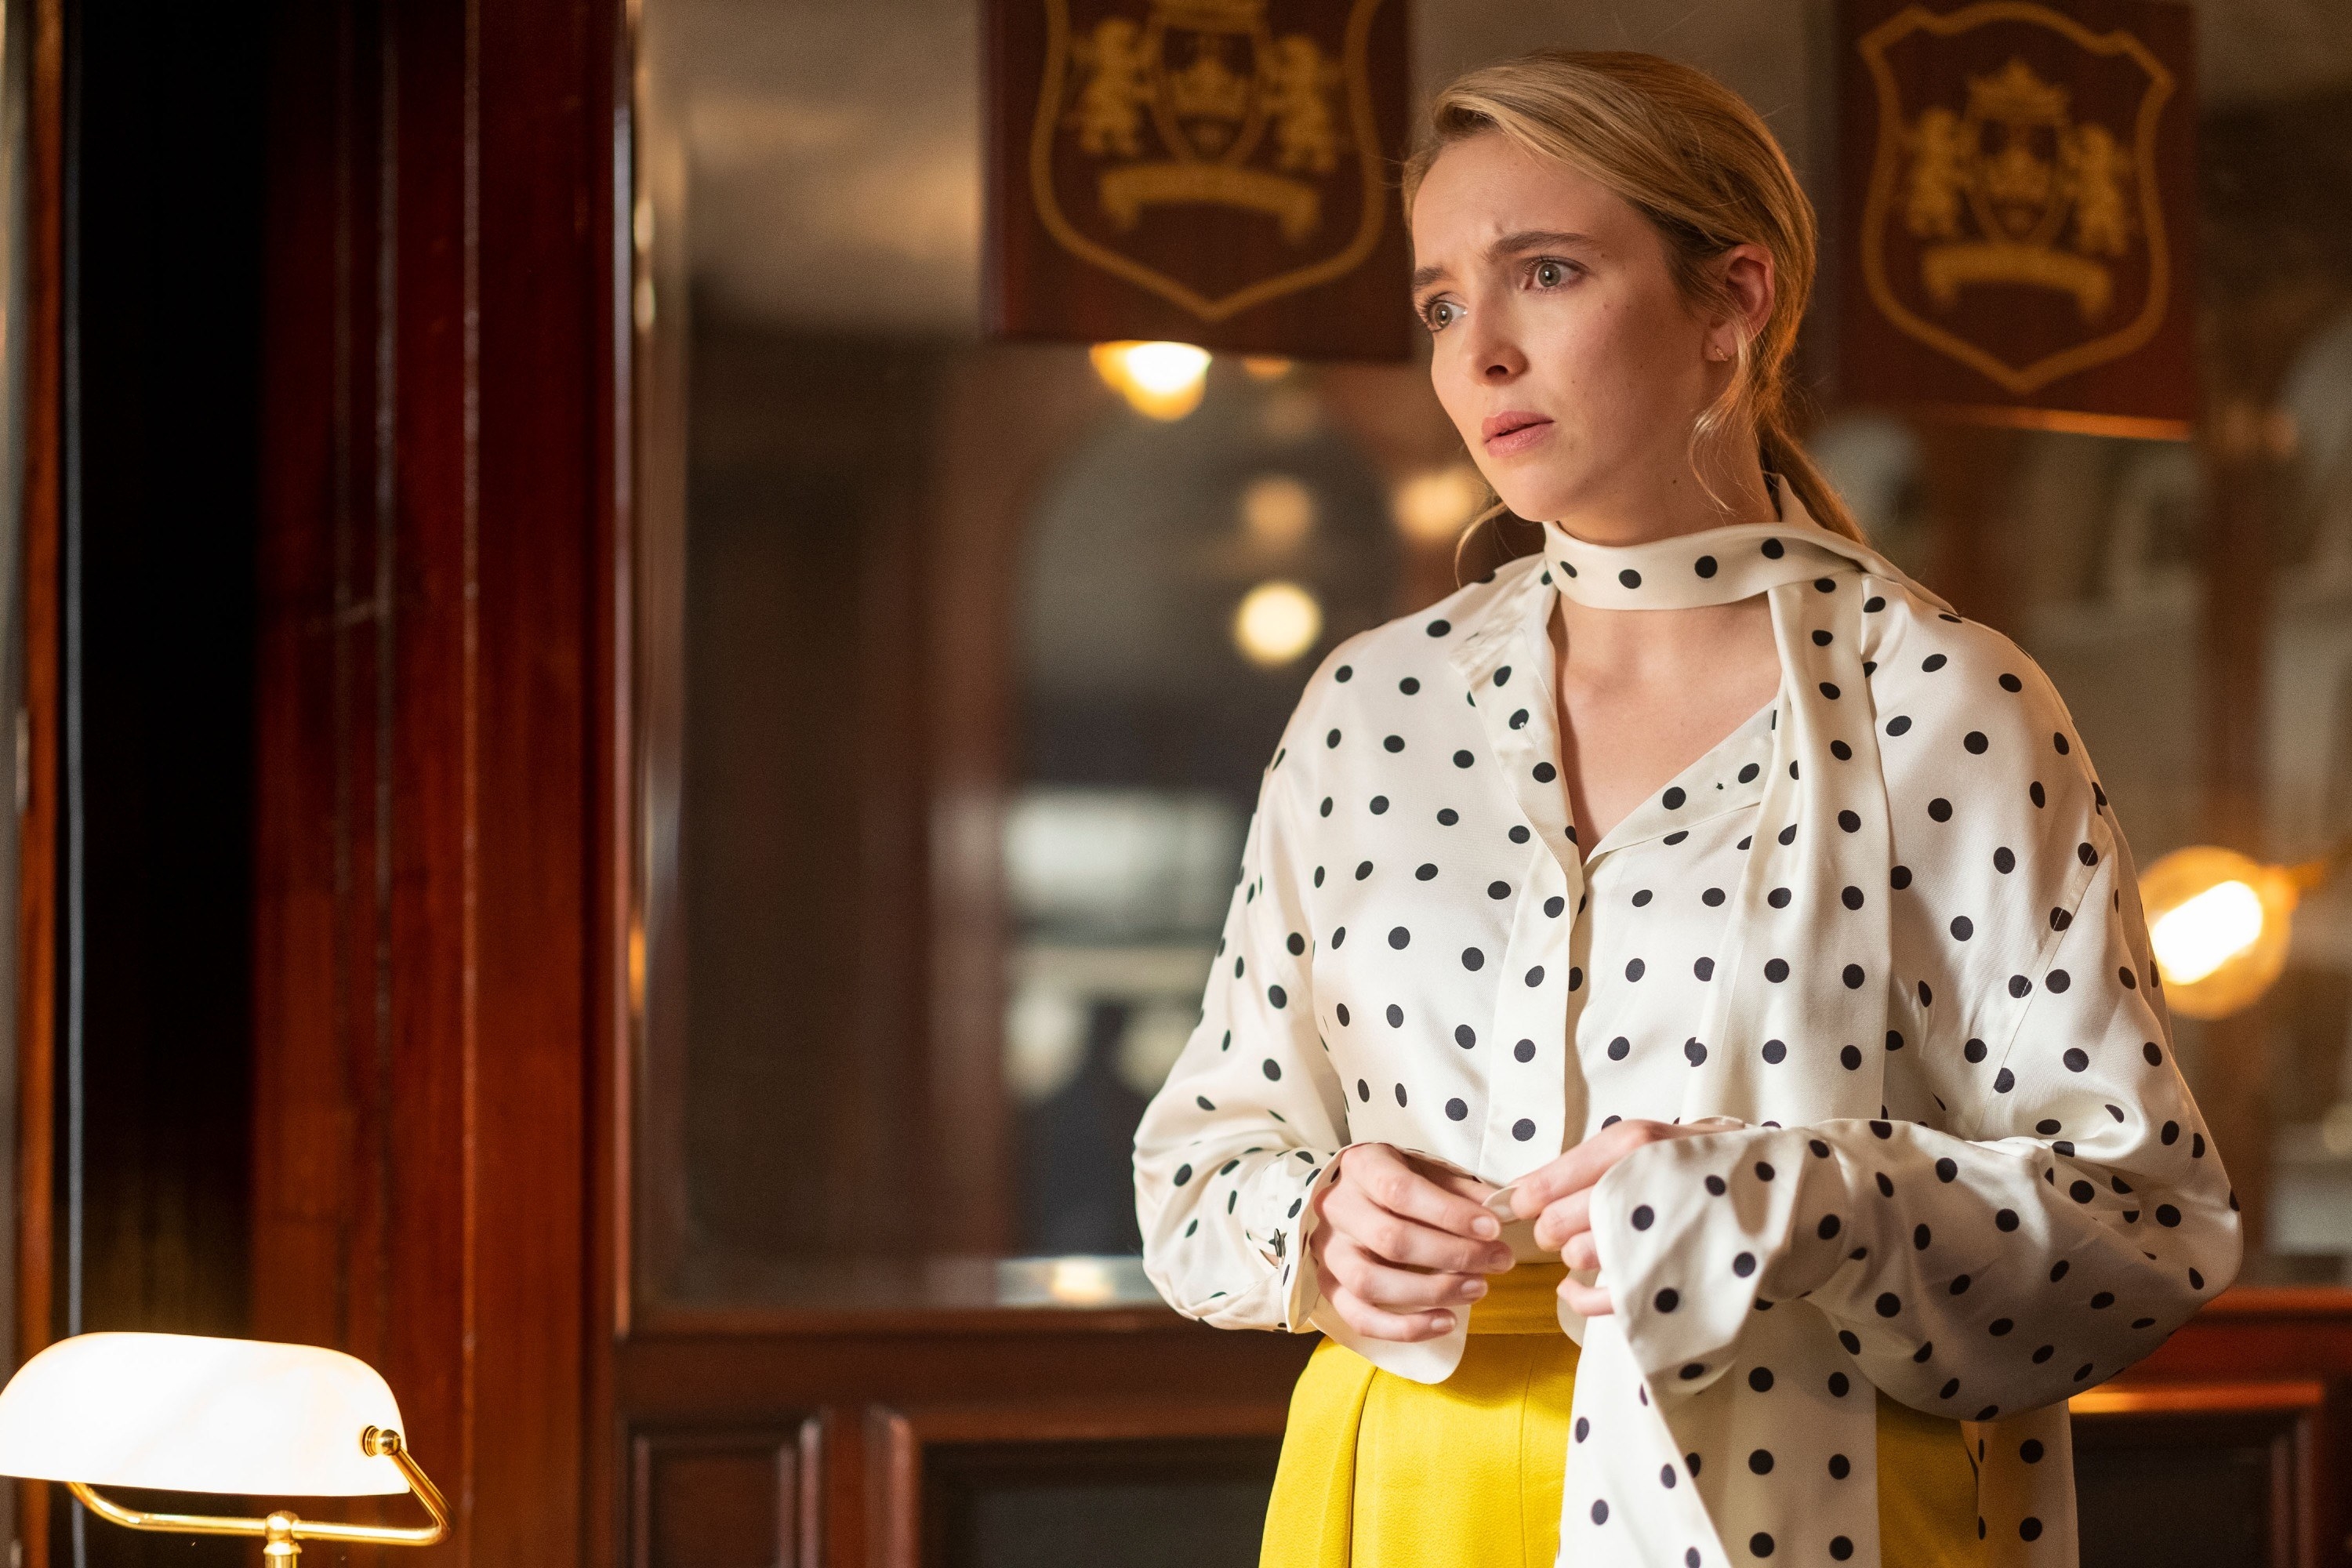 Jodie in the series wearing a black-dot blouse